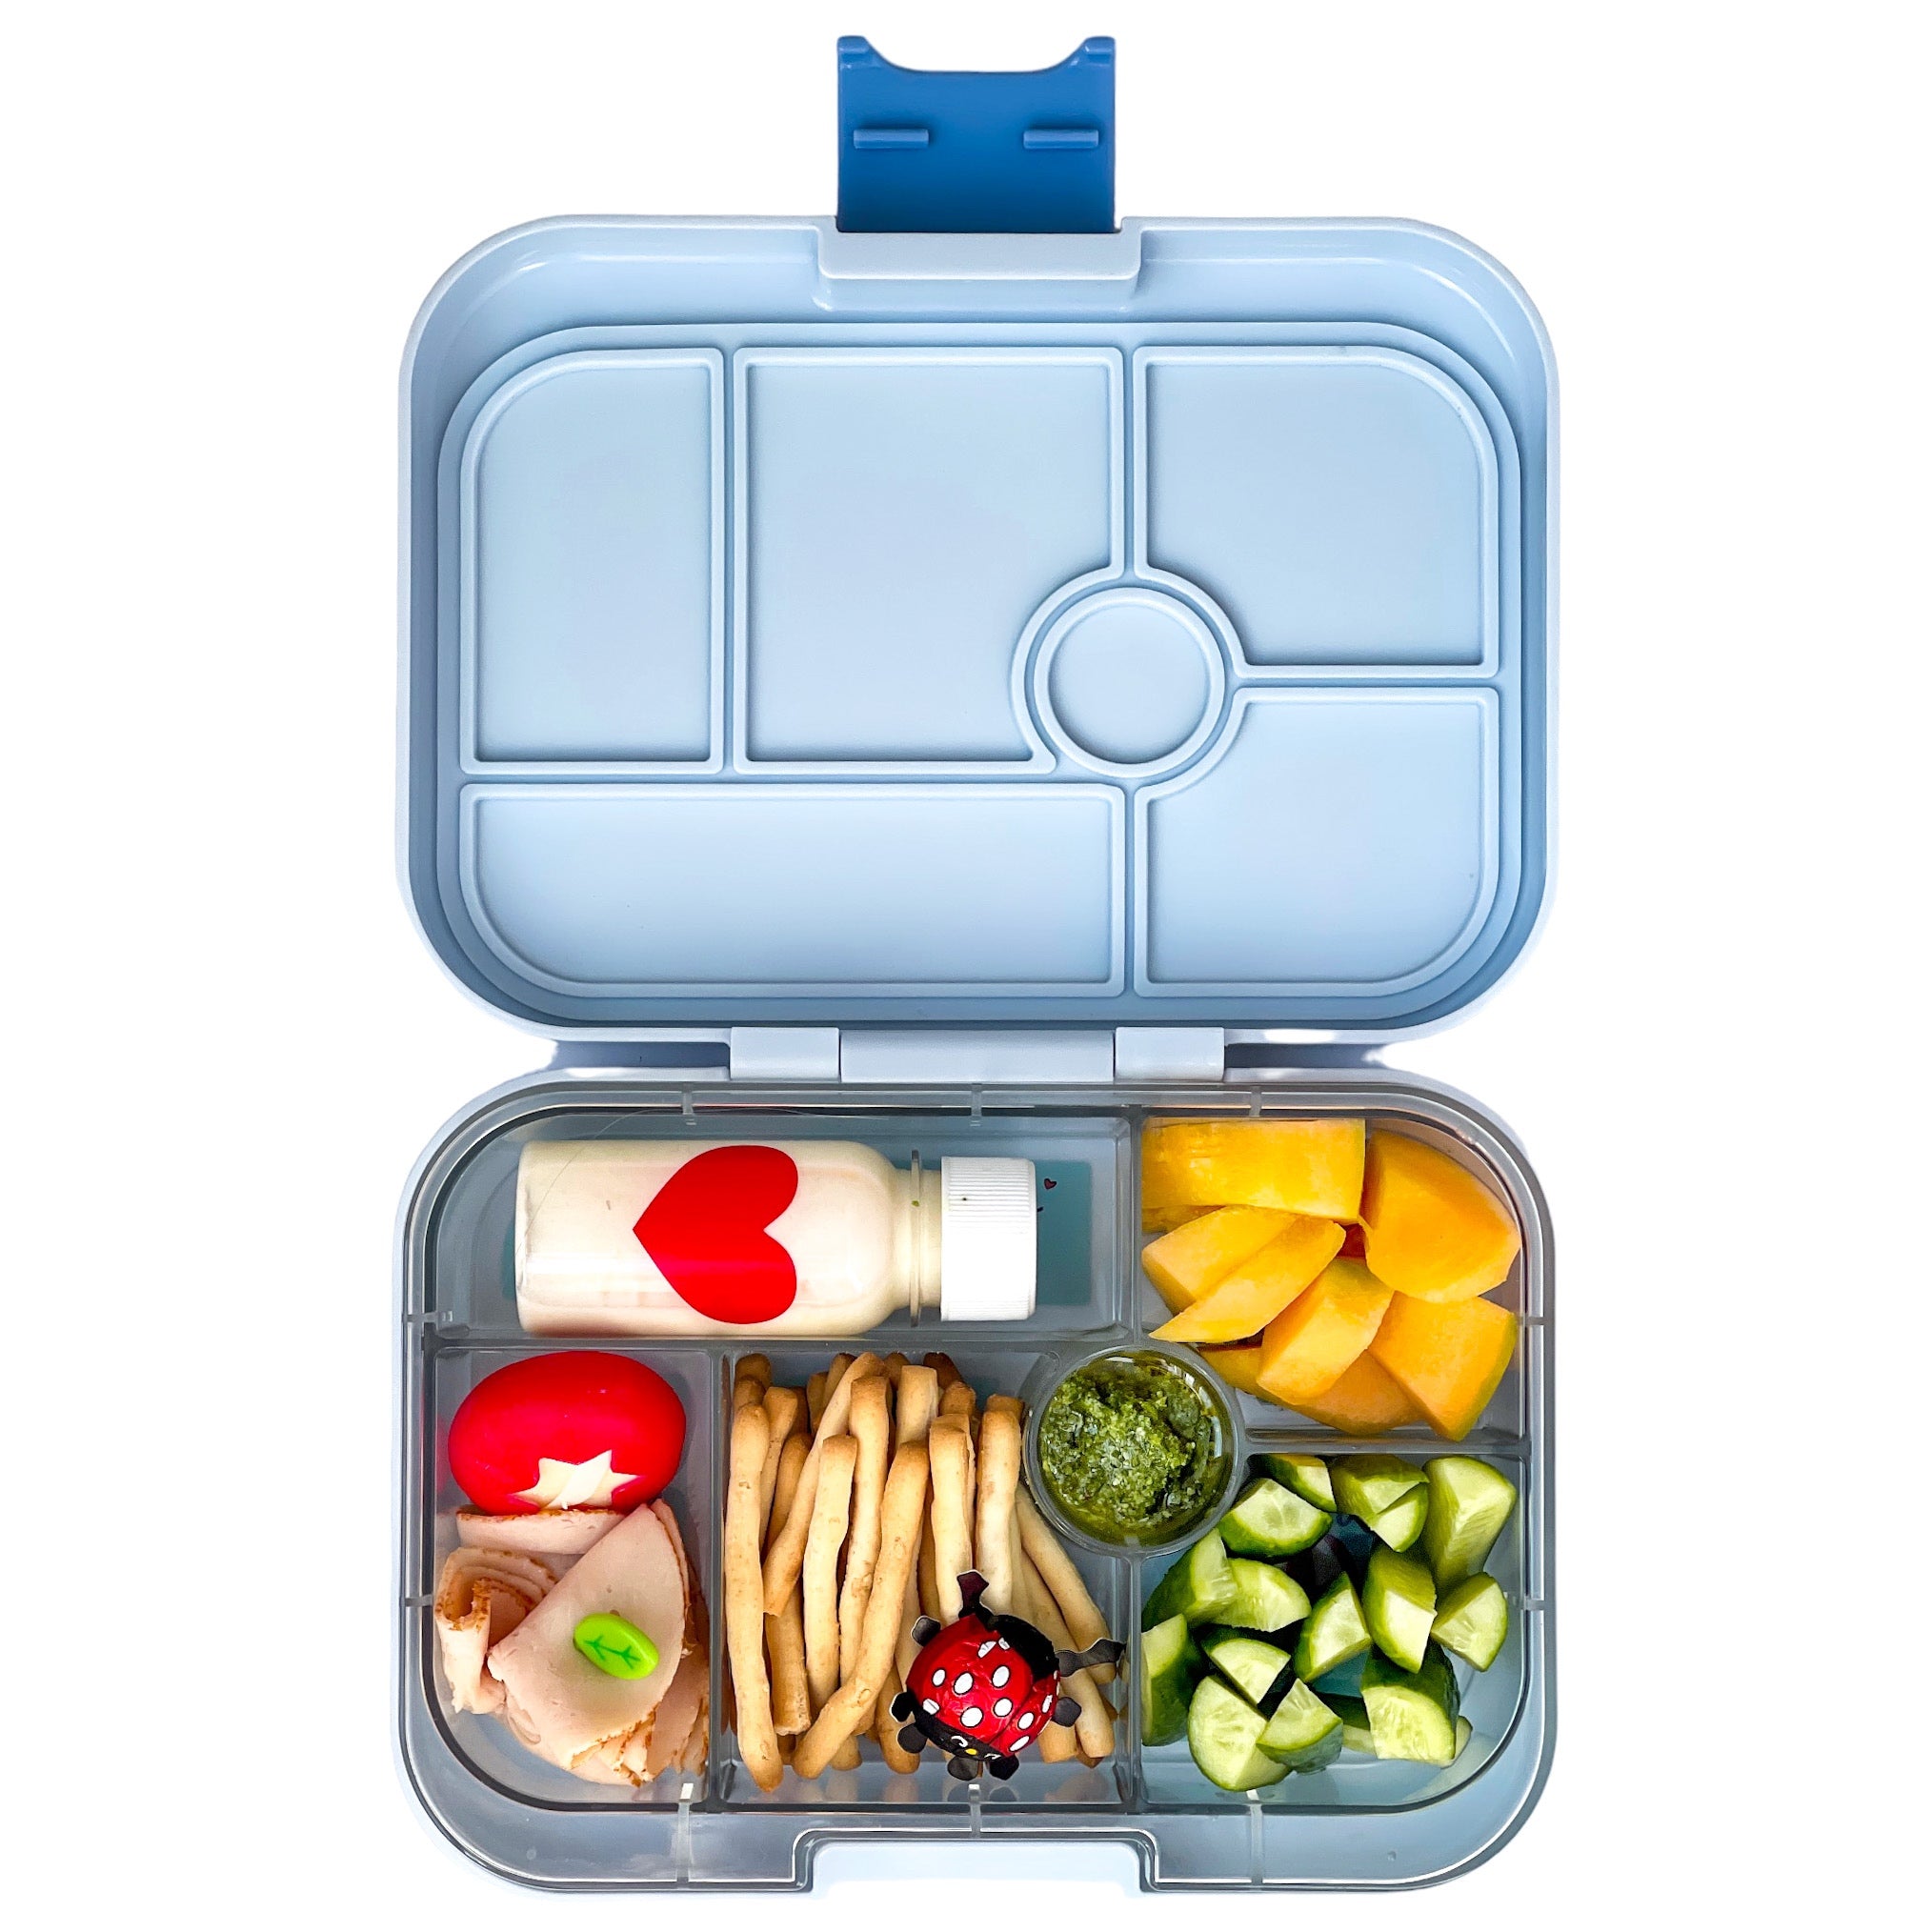  Yumbox Original - Leakproof 5-Compartment Bento Lunchbox for  Kids (2-7 Years), Easy-Open Latch, Optimal Portion Sizes & Dishwasher Safe  Tray (Hazy Gray) : Home & Kitchen